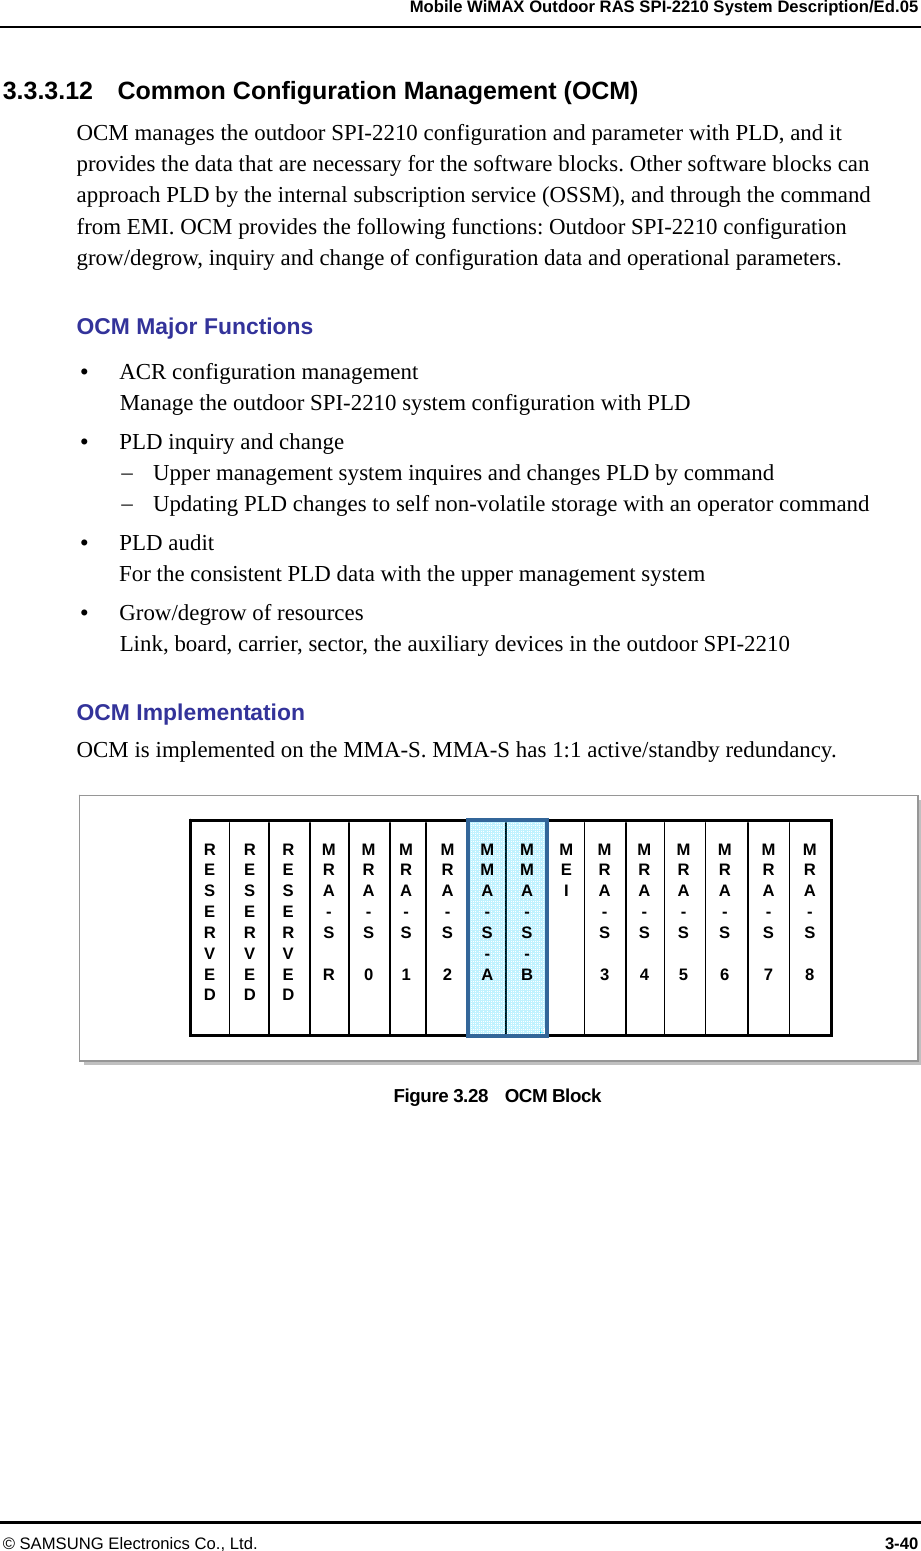   Mobile WiMAX Outdoor RAS SPI-2210 System Description/Ed.05 © SAMSUNG Electronics Co., Ltd.  3-40 3.3.3.12    Common Configuration Management (OCM) OCM manages the outdoor SPI-2210 configuration and parameter with PLD, and it provides the data that are necessary for the software blocks. Other software blocks can approach PLD by the internal subscription service (OSSM), and through the command from EMI. OCM provides the following functions: Outdoor SPI-2210 configuration grow/degrow, inquiry and change of configuration data and operational parameters.  OCM Major Functions  ACR configuration management Manage the outdoor SPI-2210 system configuration with PLD  PLD inquiry and change  Upper management system inquires and changes PLD by command  Updating PLD changes to self non-volatile storage with an operator command    PLD audit For the consistent PLD data with the upper management system  Grow/degrow of resources Link, board, carrier, sector, the auxiliary devices in the outdoor SPI-2210    OCM Implementation OCM is implemented on the MMA-S. MMA-S has 1:1 active/standby redundancy.  Figure 3.28    OCM Block  RESERVED MRA- S  R MMA-S- AMMA-S- BMEI RESERVED RESERVED MRA- S 0MRA- S 1MRA- S 2MRA- S 3MRA- S 4MRA- S 5MRA- S 6MRA- S  7 MRA- S  8 